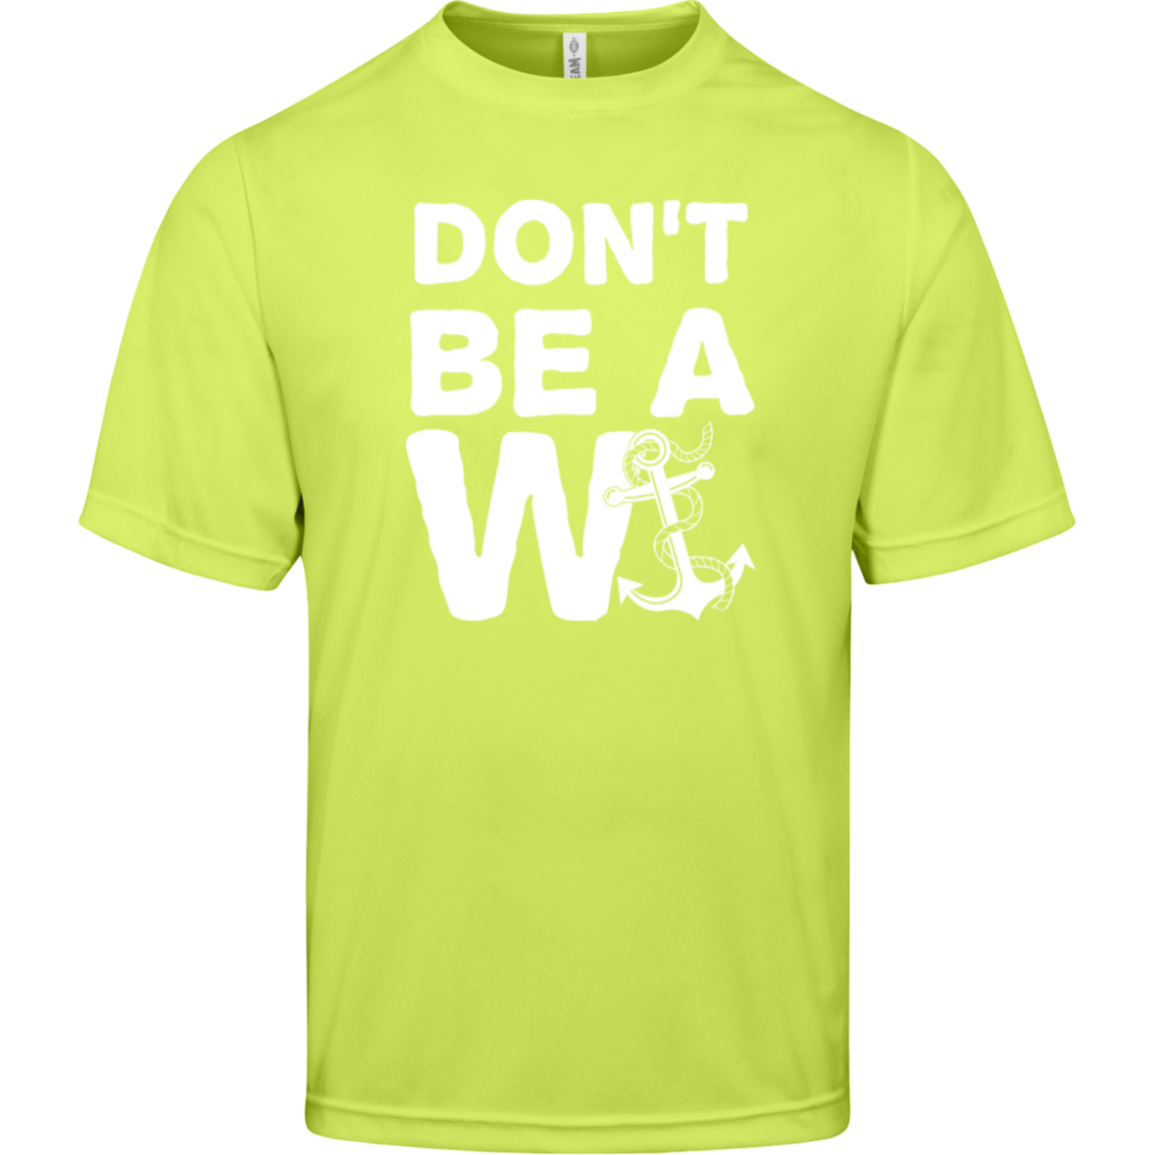 ***2 SIDED***  HRCL FL - Don't Be A Wanker - - 2 Sided - UV 40+ Protection TT11 Team 365 Mens Zone Tee